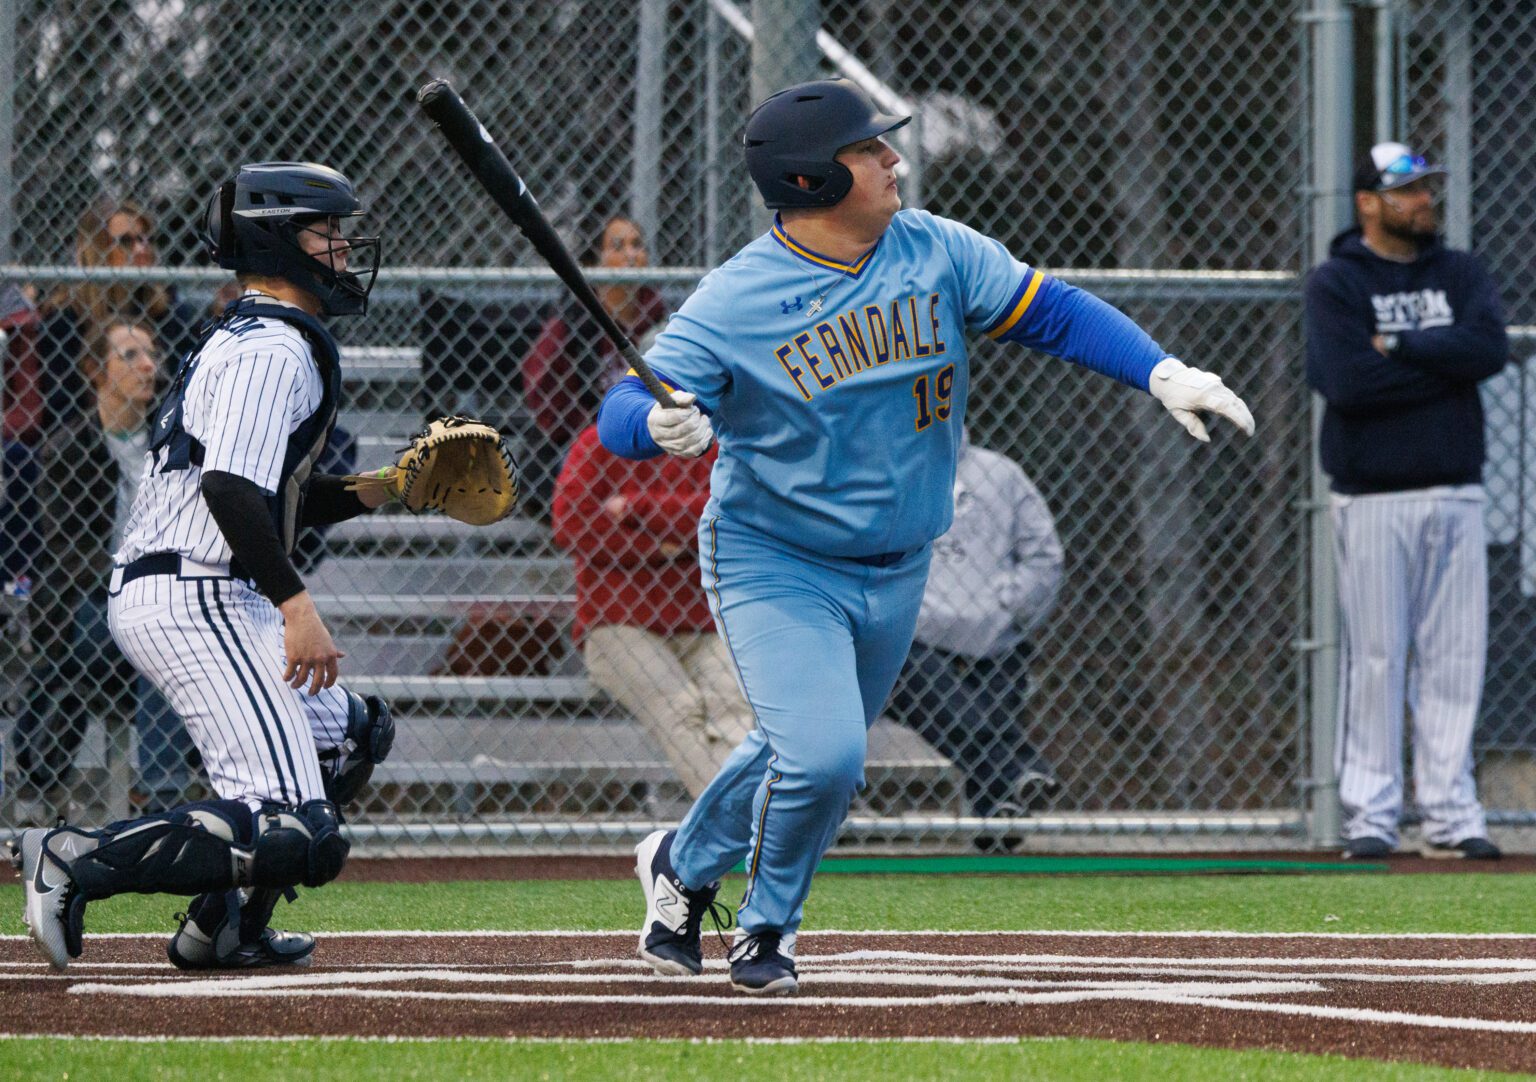 Ferndale's Camden Raymond connects on a Squalicum pitch to drive in a run March 17 during a 9-3 win over the Storm.